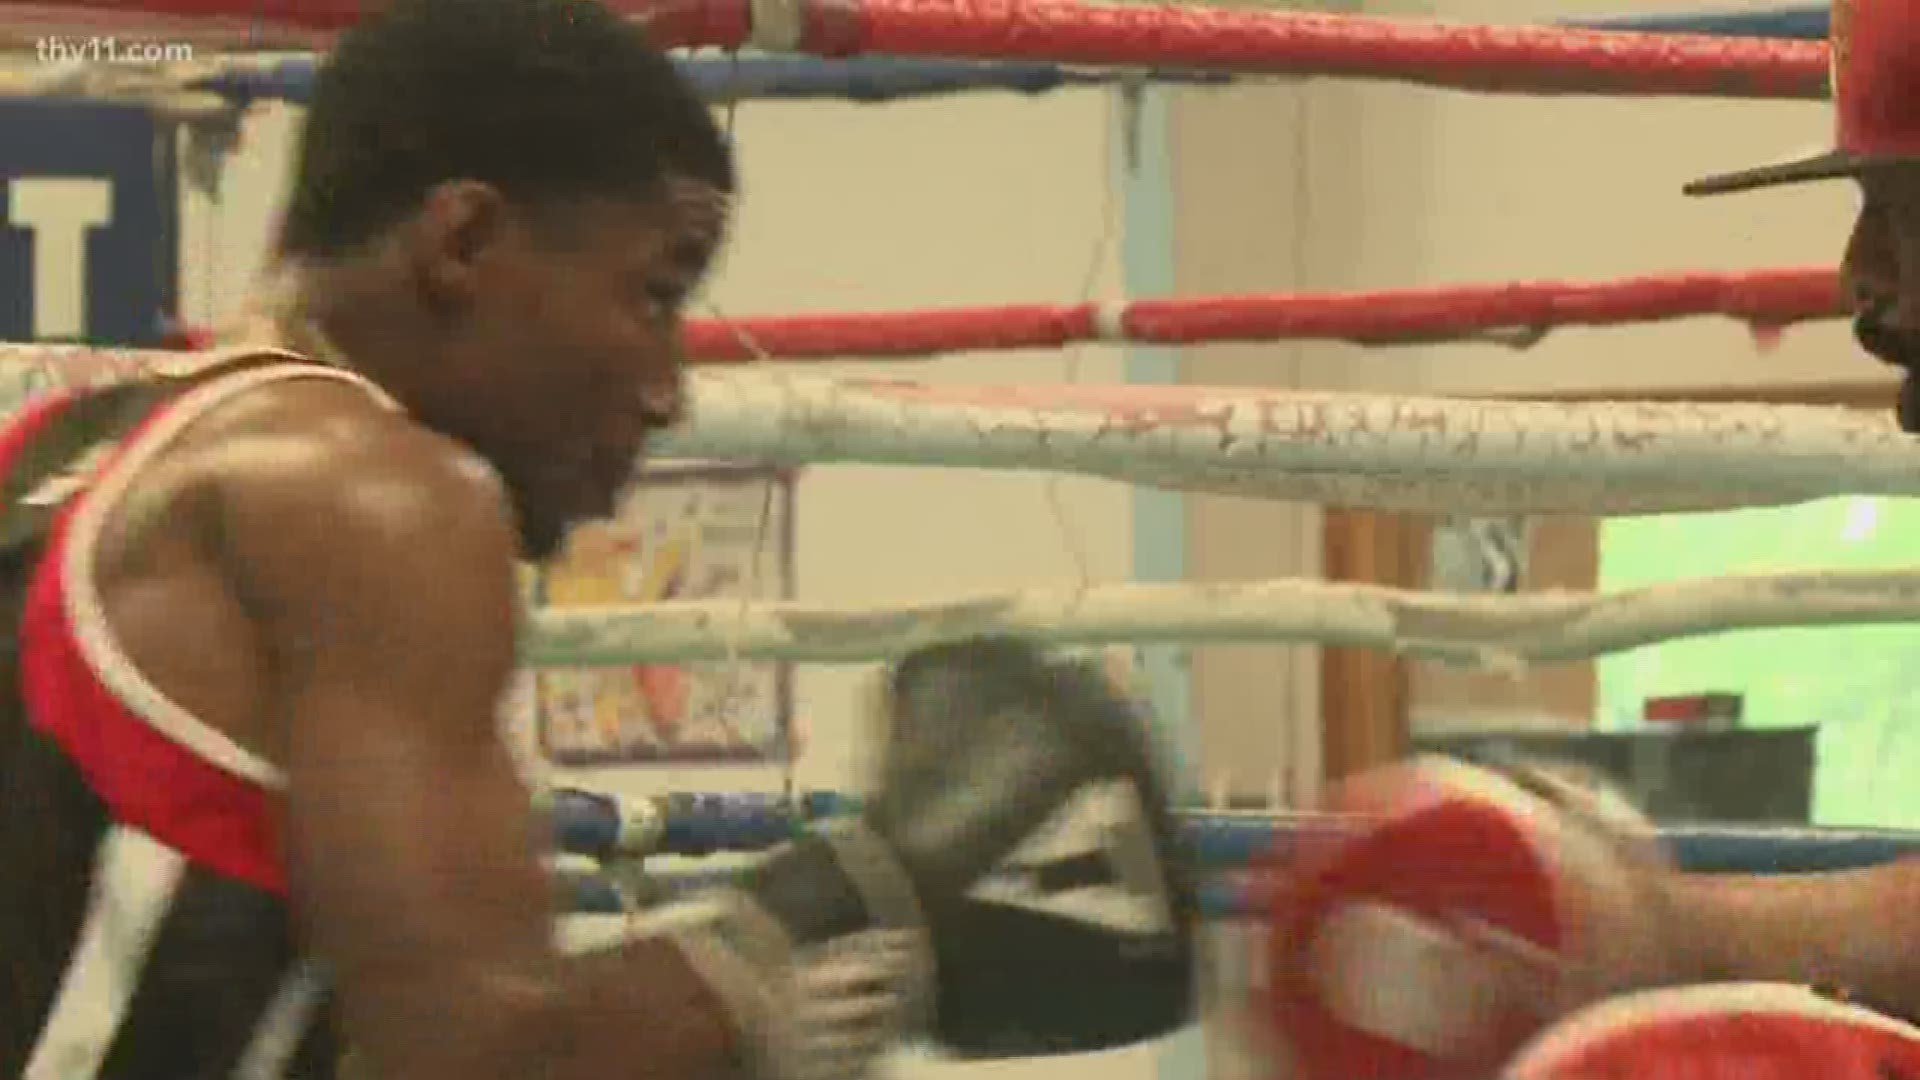 Pine Bluff boxer Quincy Means is looking for redemption in the ring